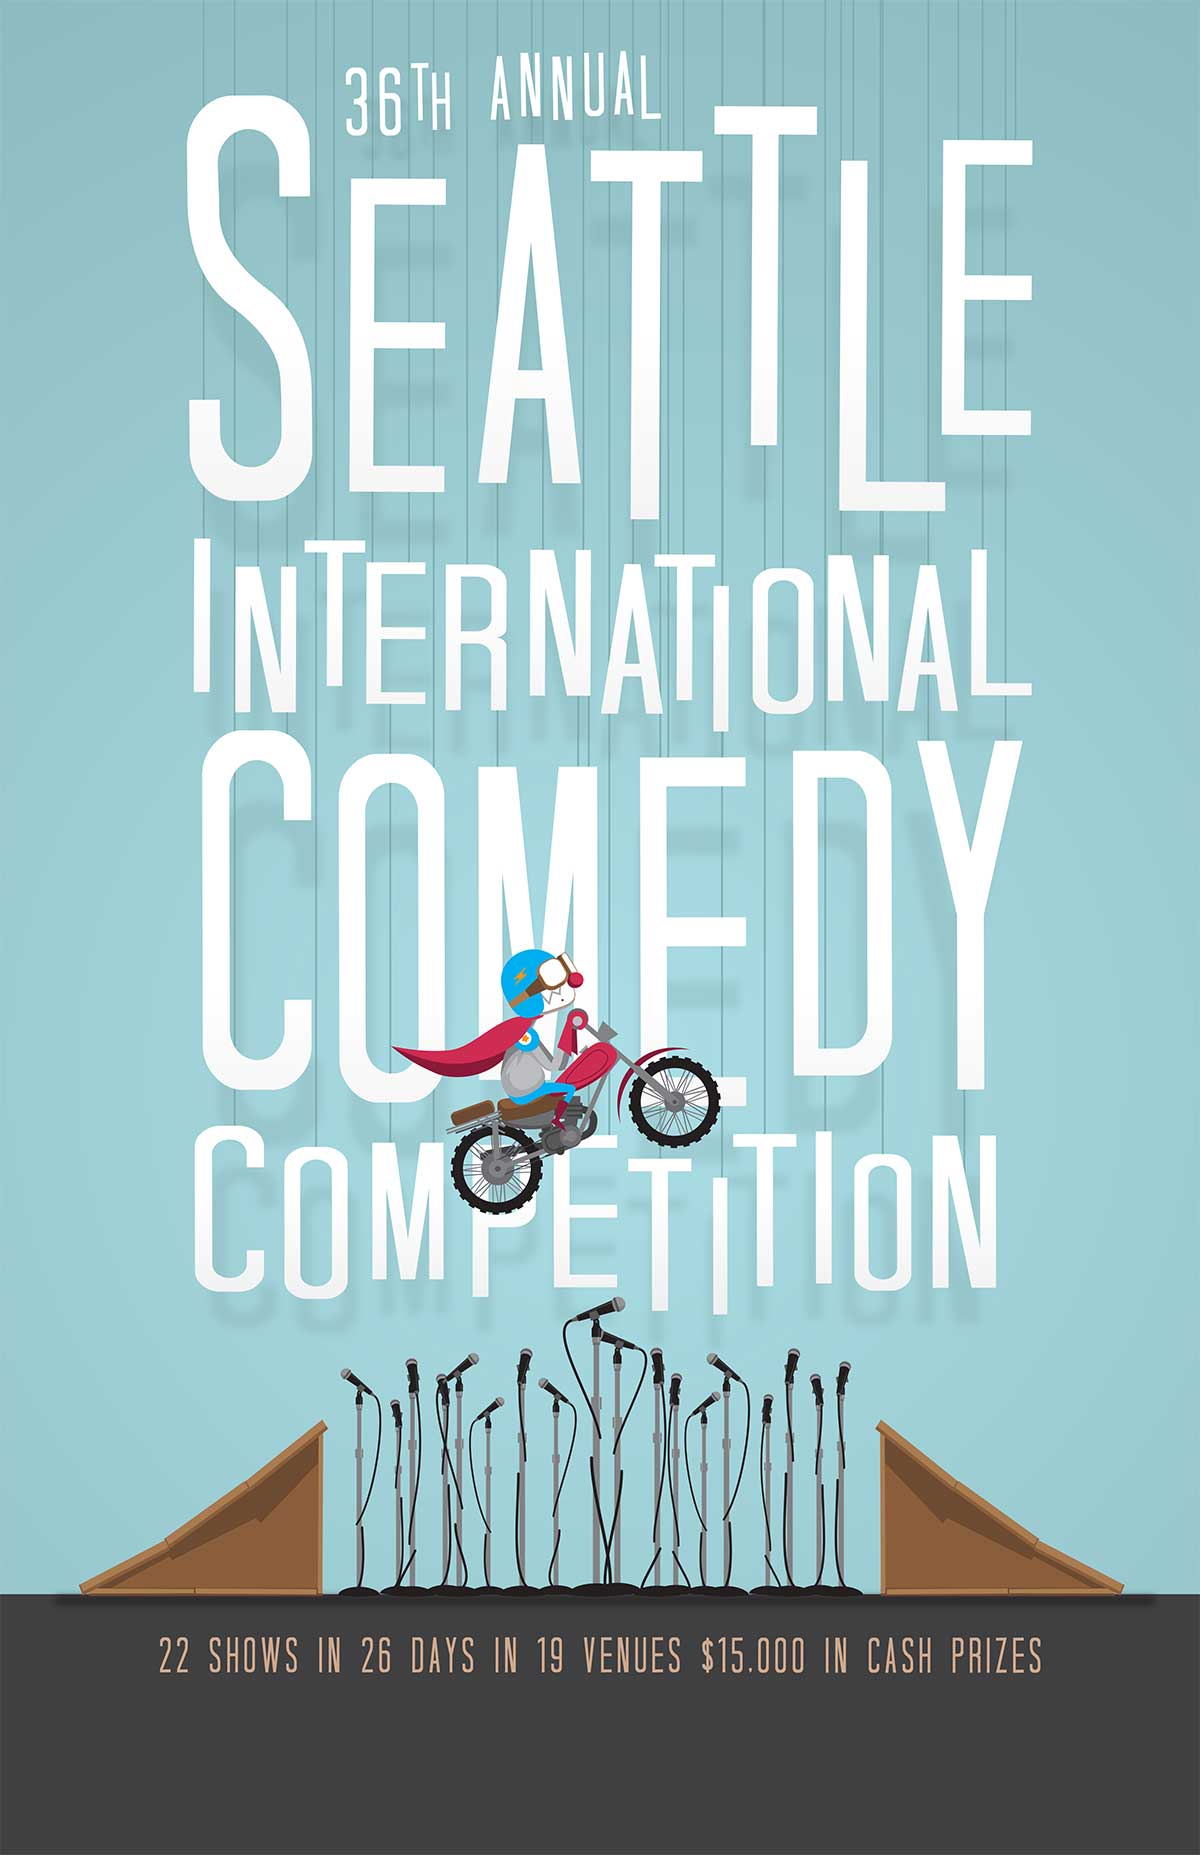 36th Annual Seattle International Comedy Competition